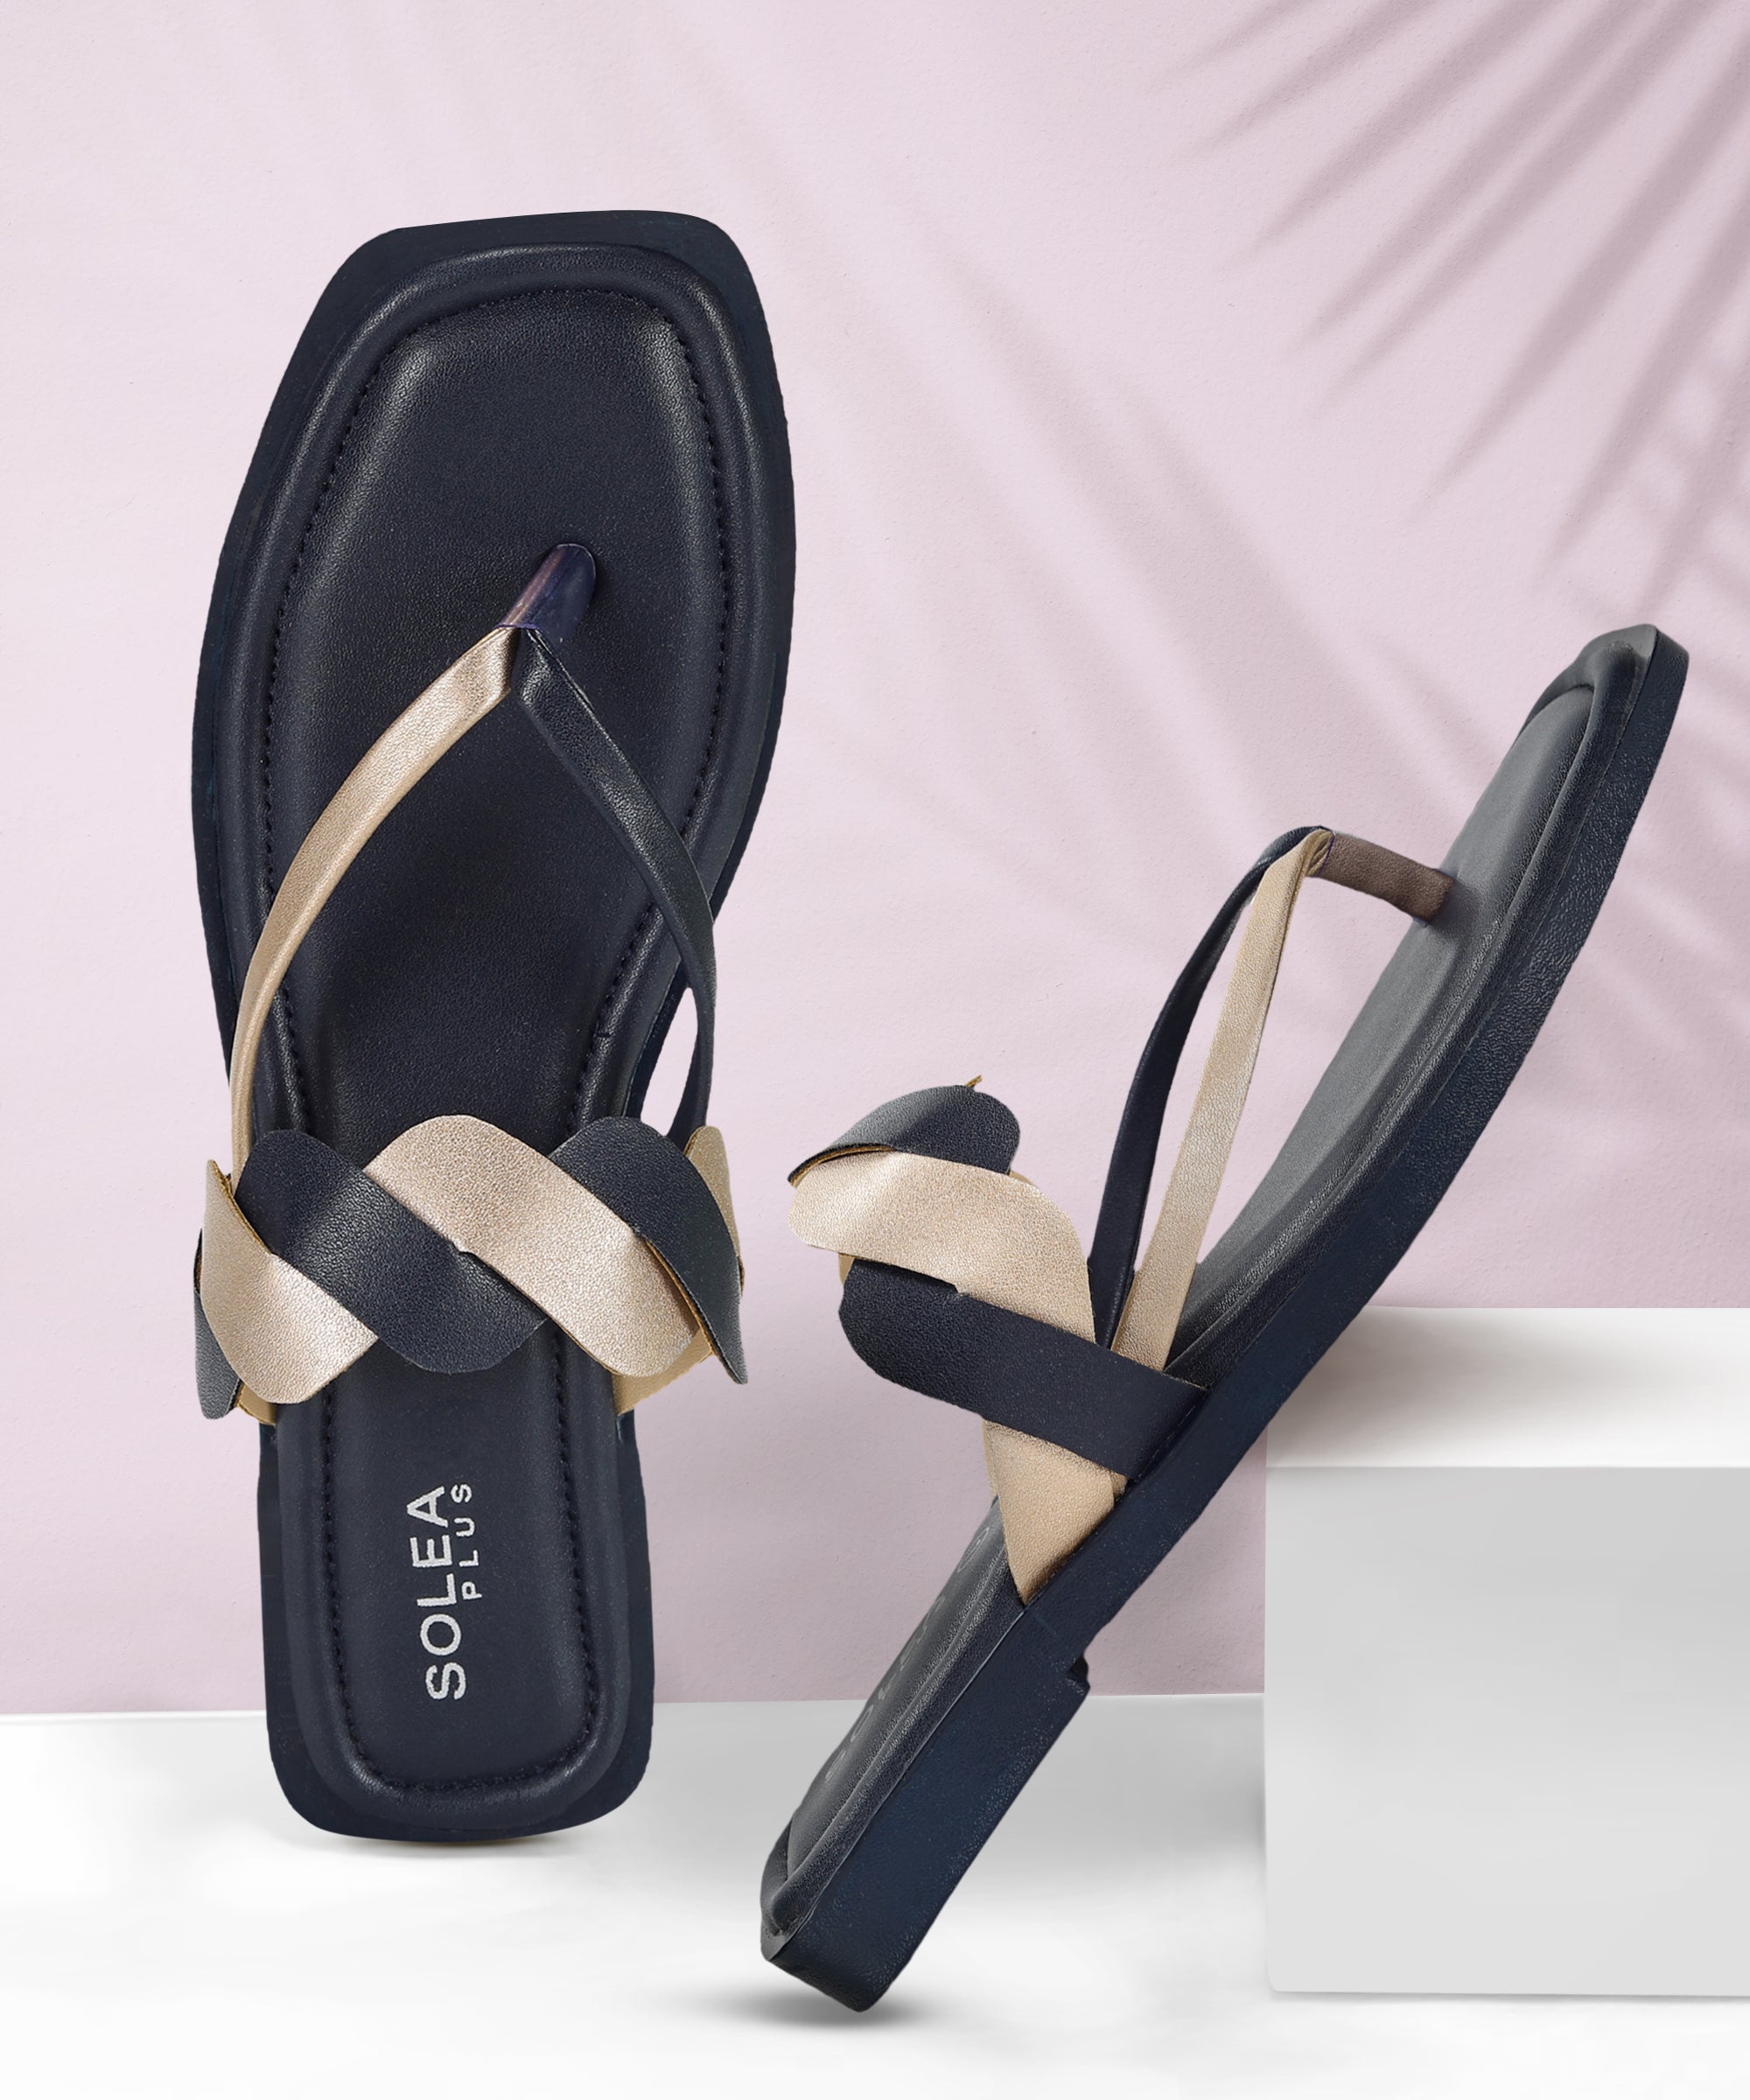 Paragon RK6024L Women Sandals | Casual &amp; Formal Sandals | Stylish, Comfortable &amp; Durable | For Daily &amp; Occasion Wear